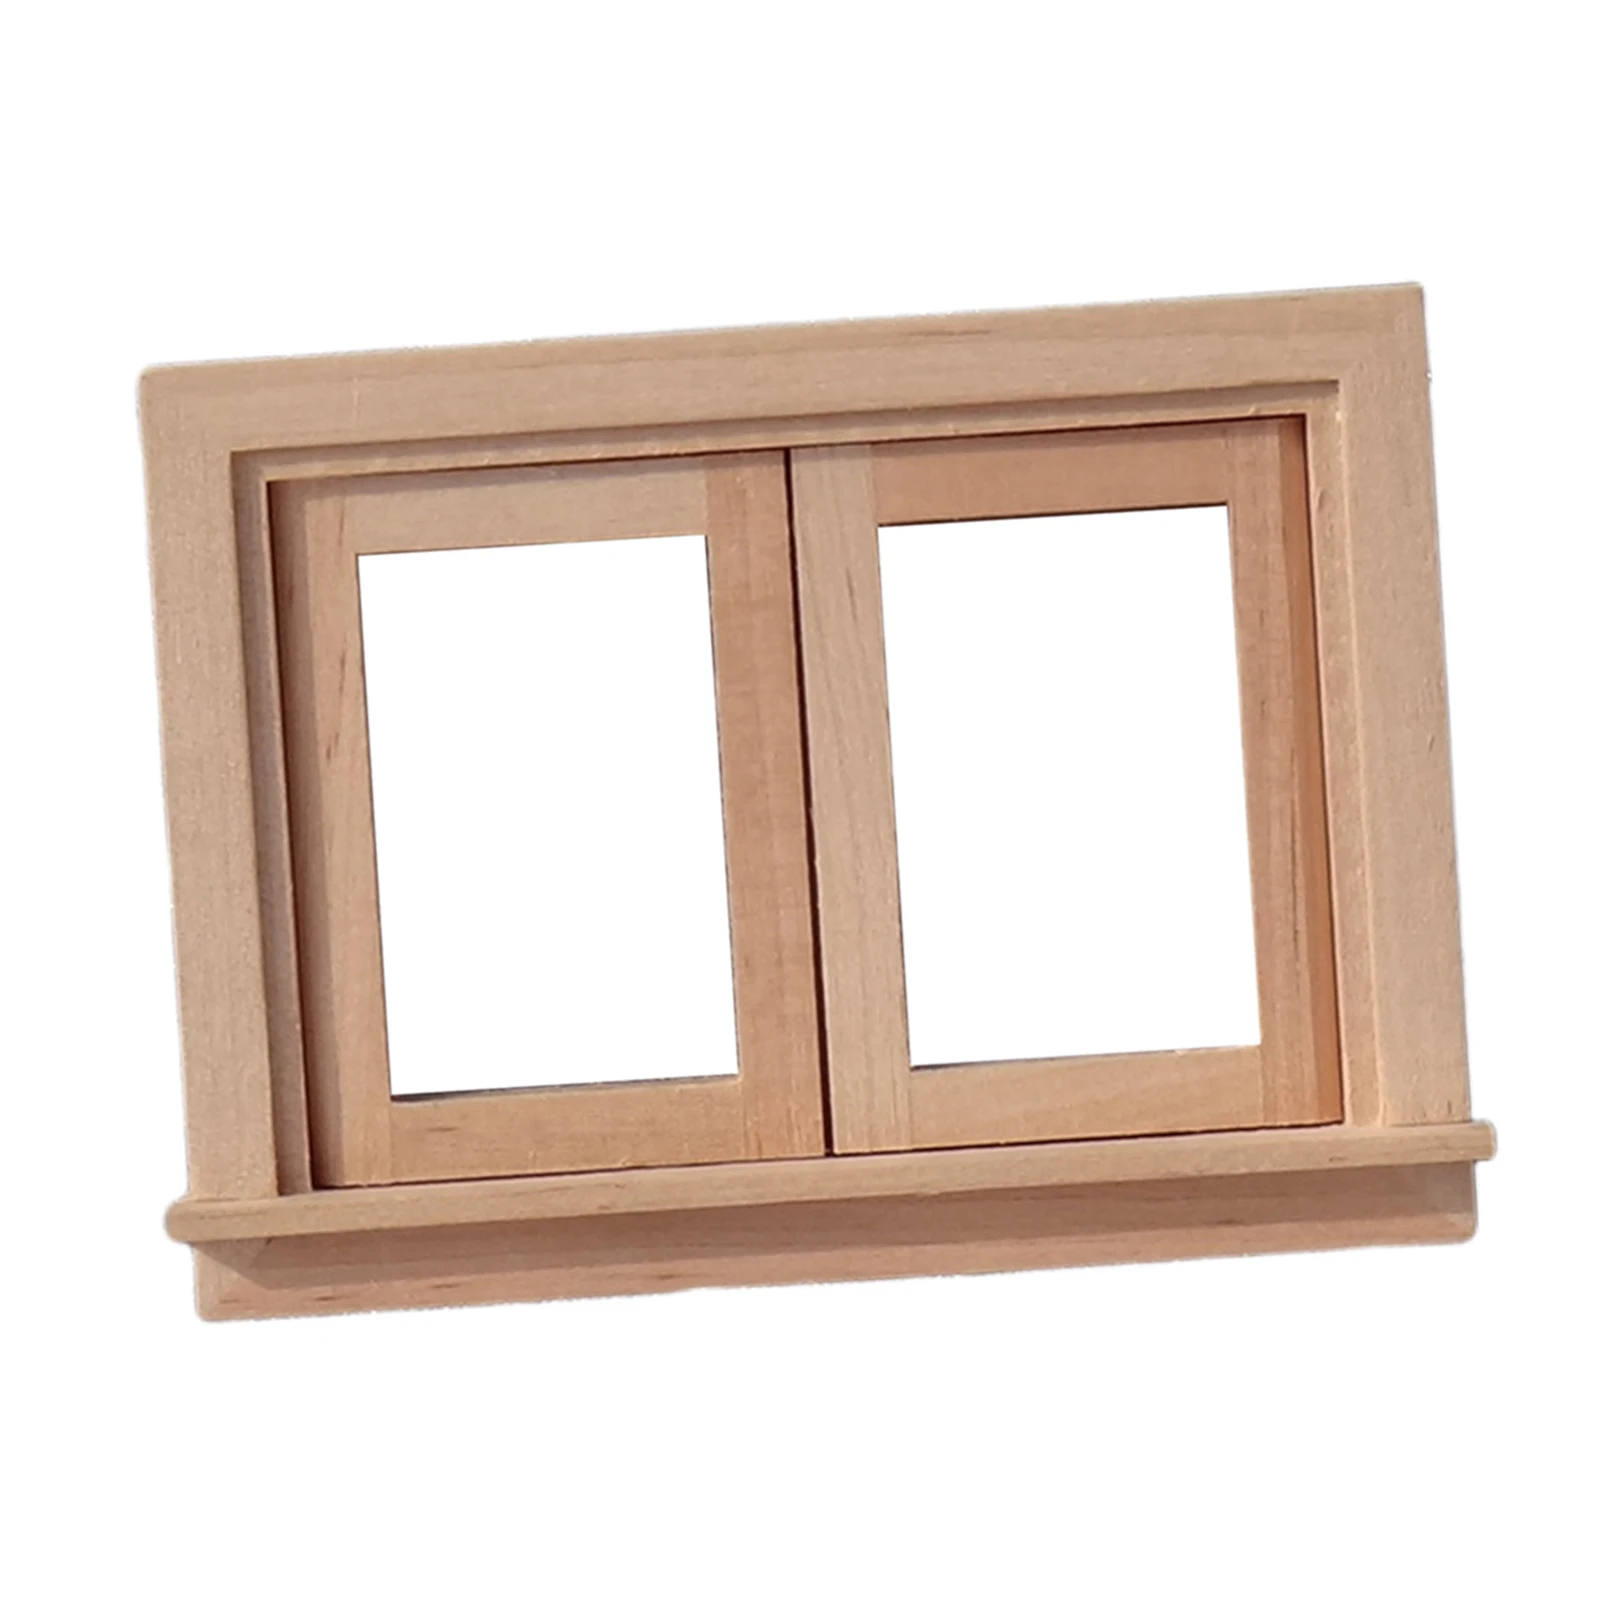 1/12 Dollhouse Miniature Wood Window with Two Panes Building Kit Life Scene DIY Accessories Pretend Toys Playset